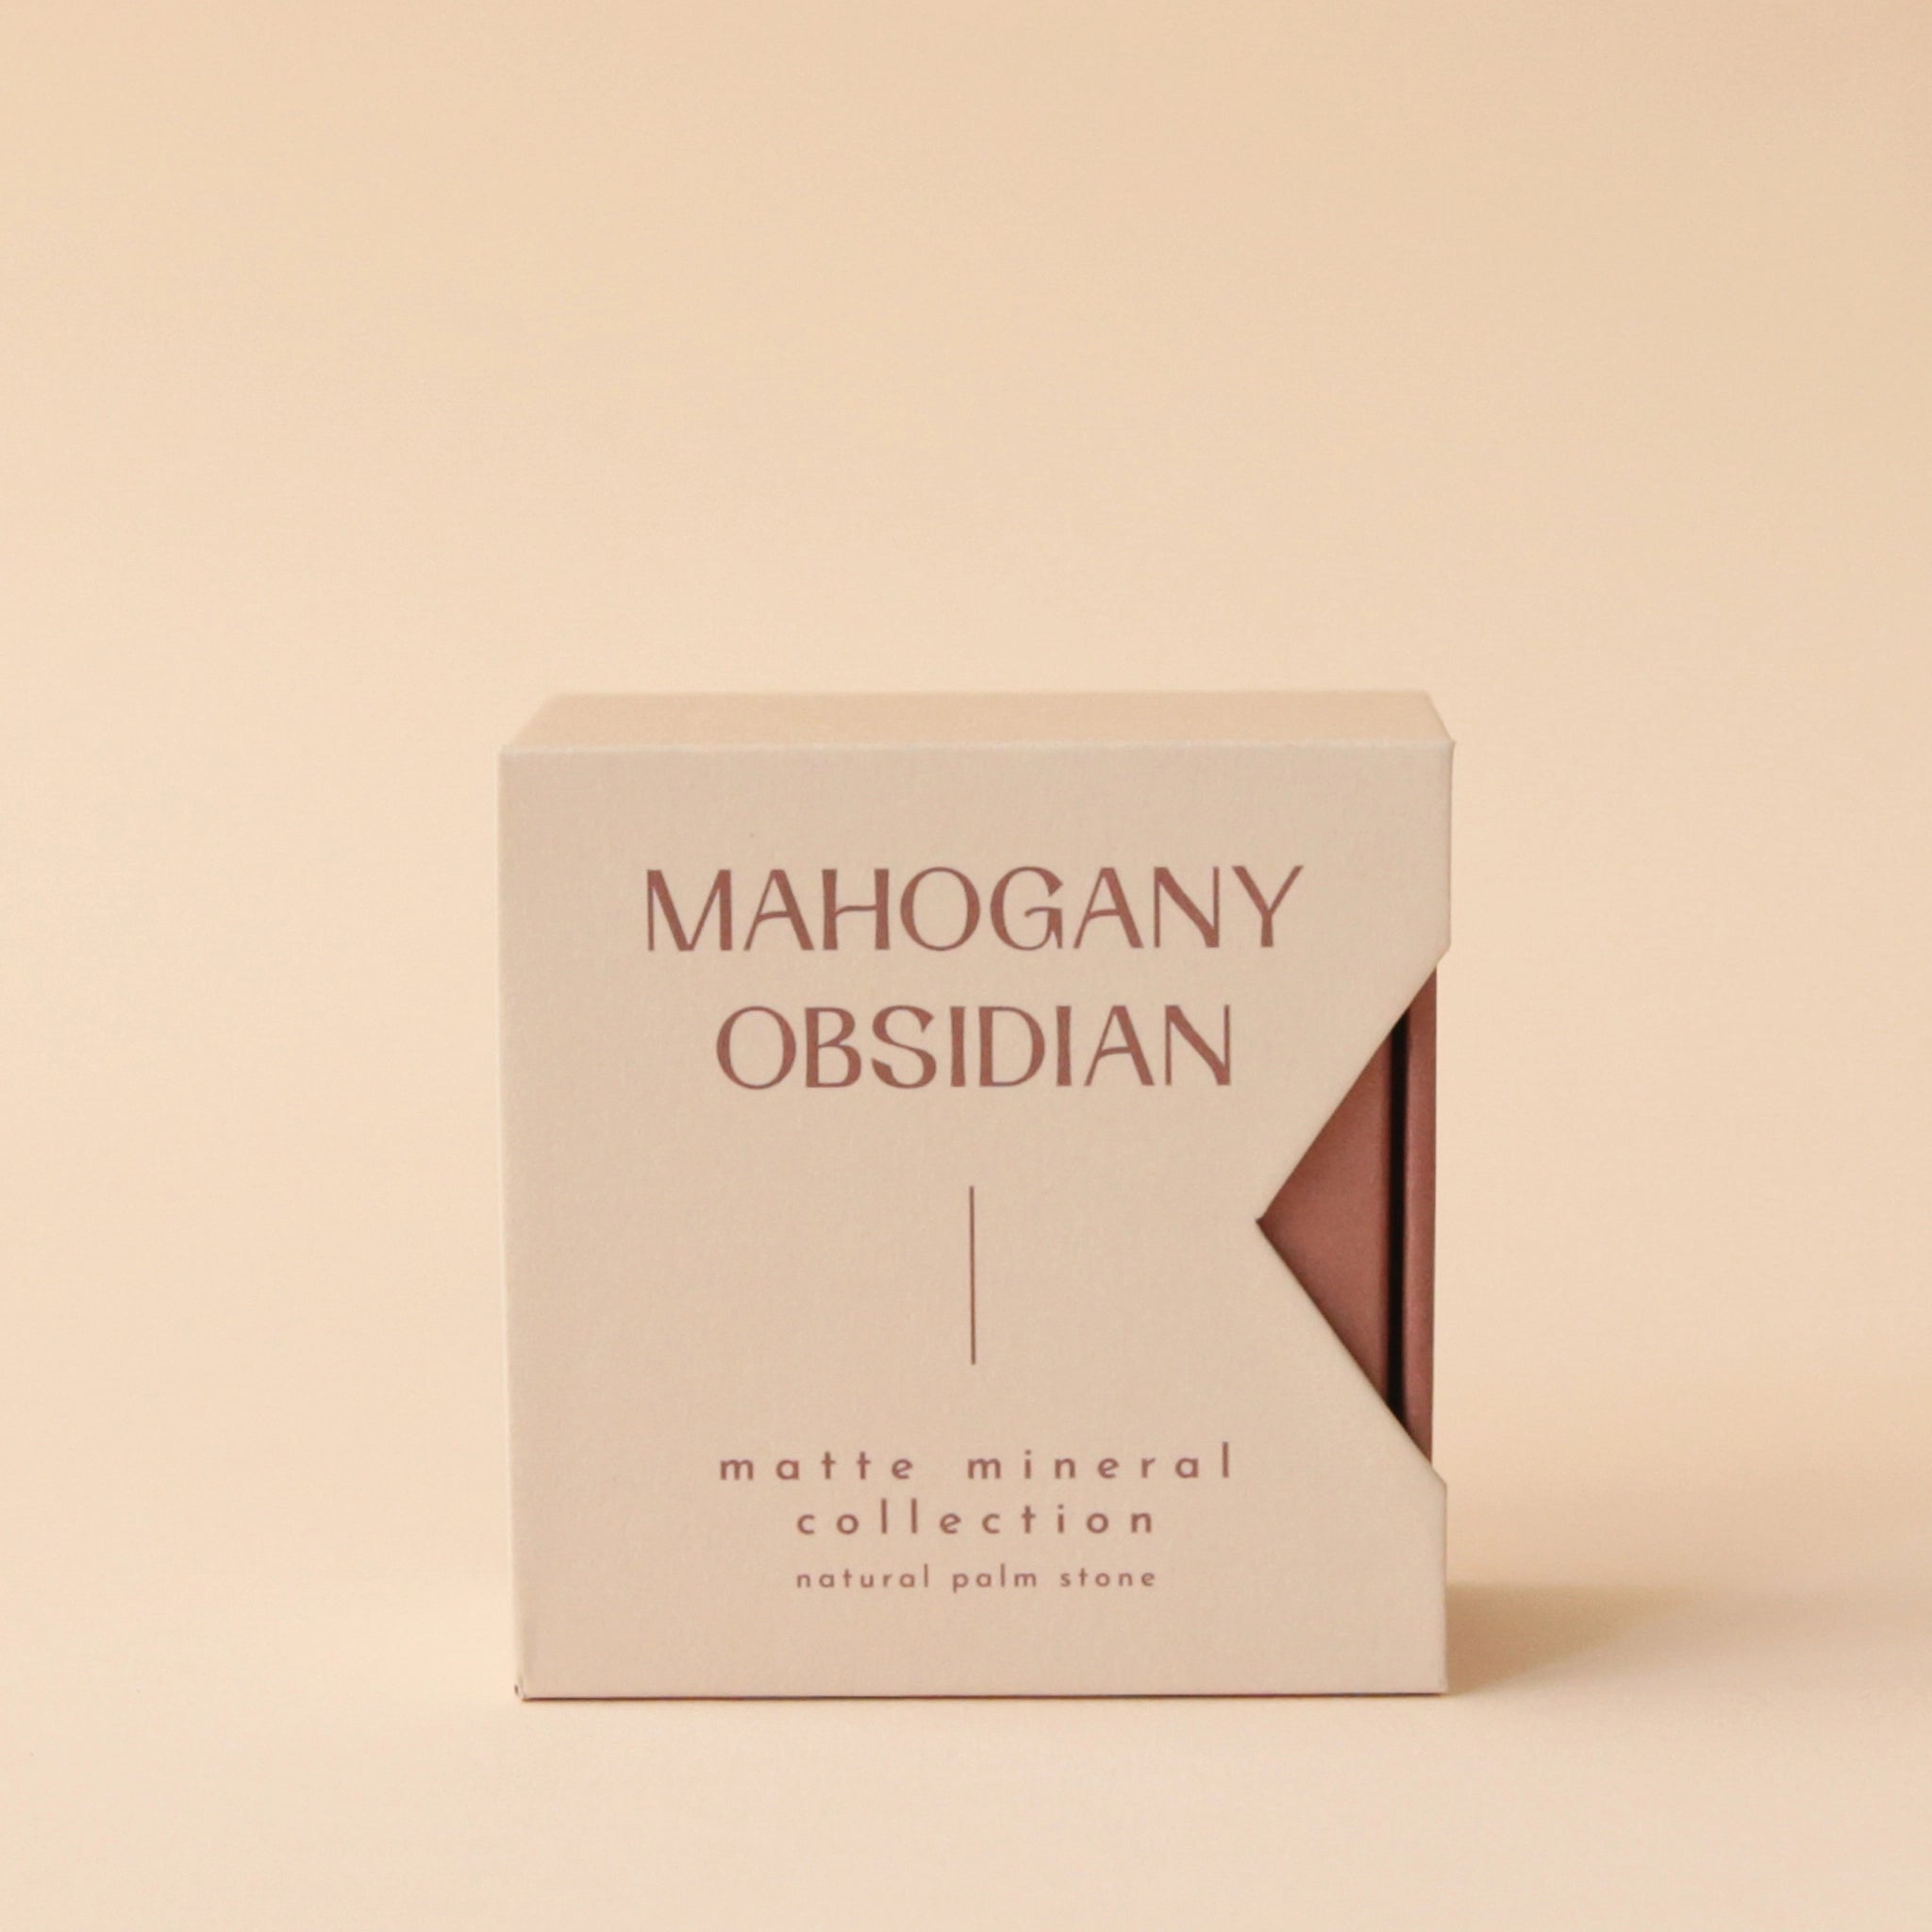 A tan box that reads, "Mahogany Obsidian Matte Mineral Collection" in dark red letters.